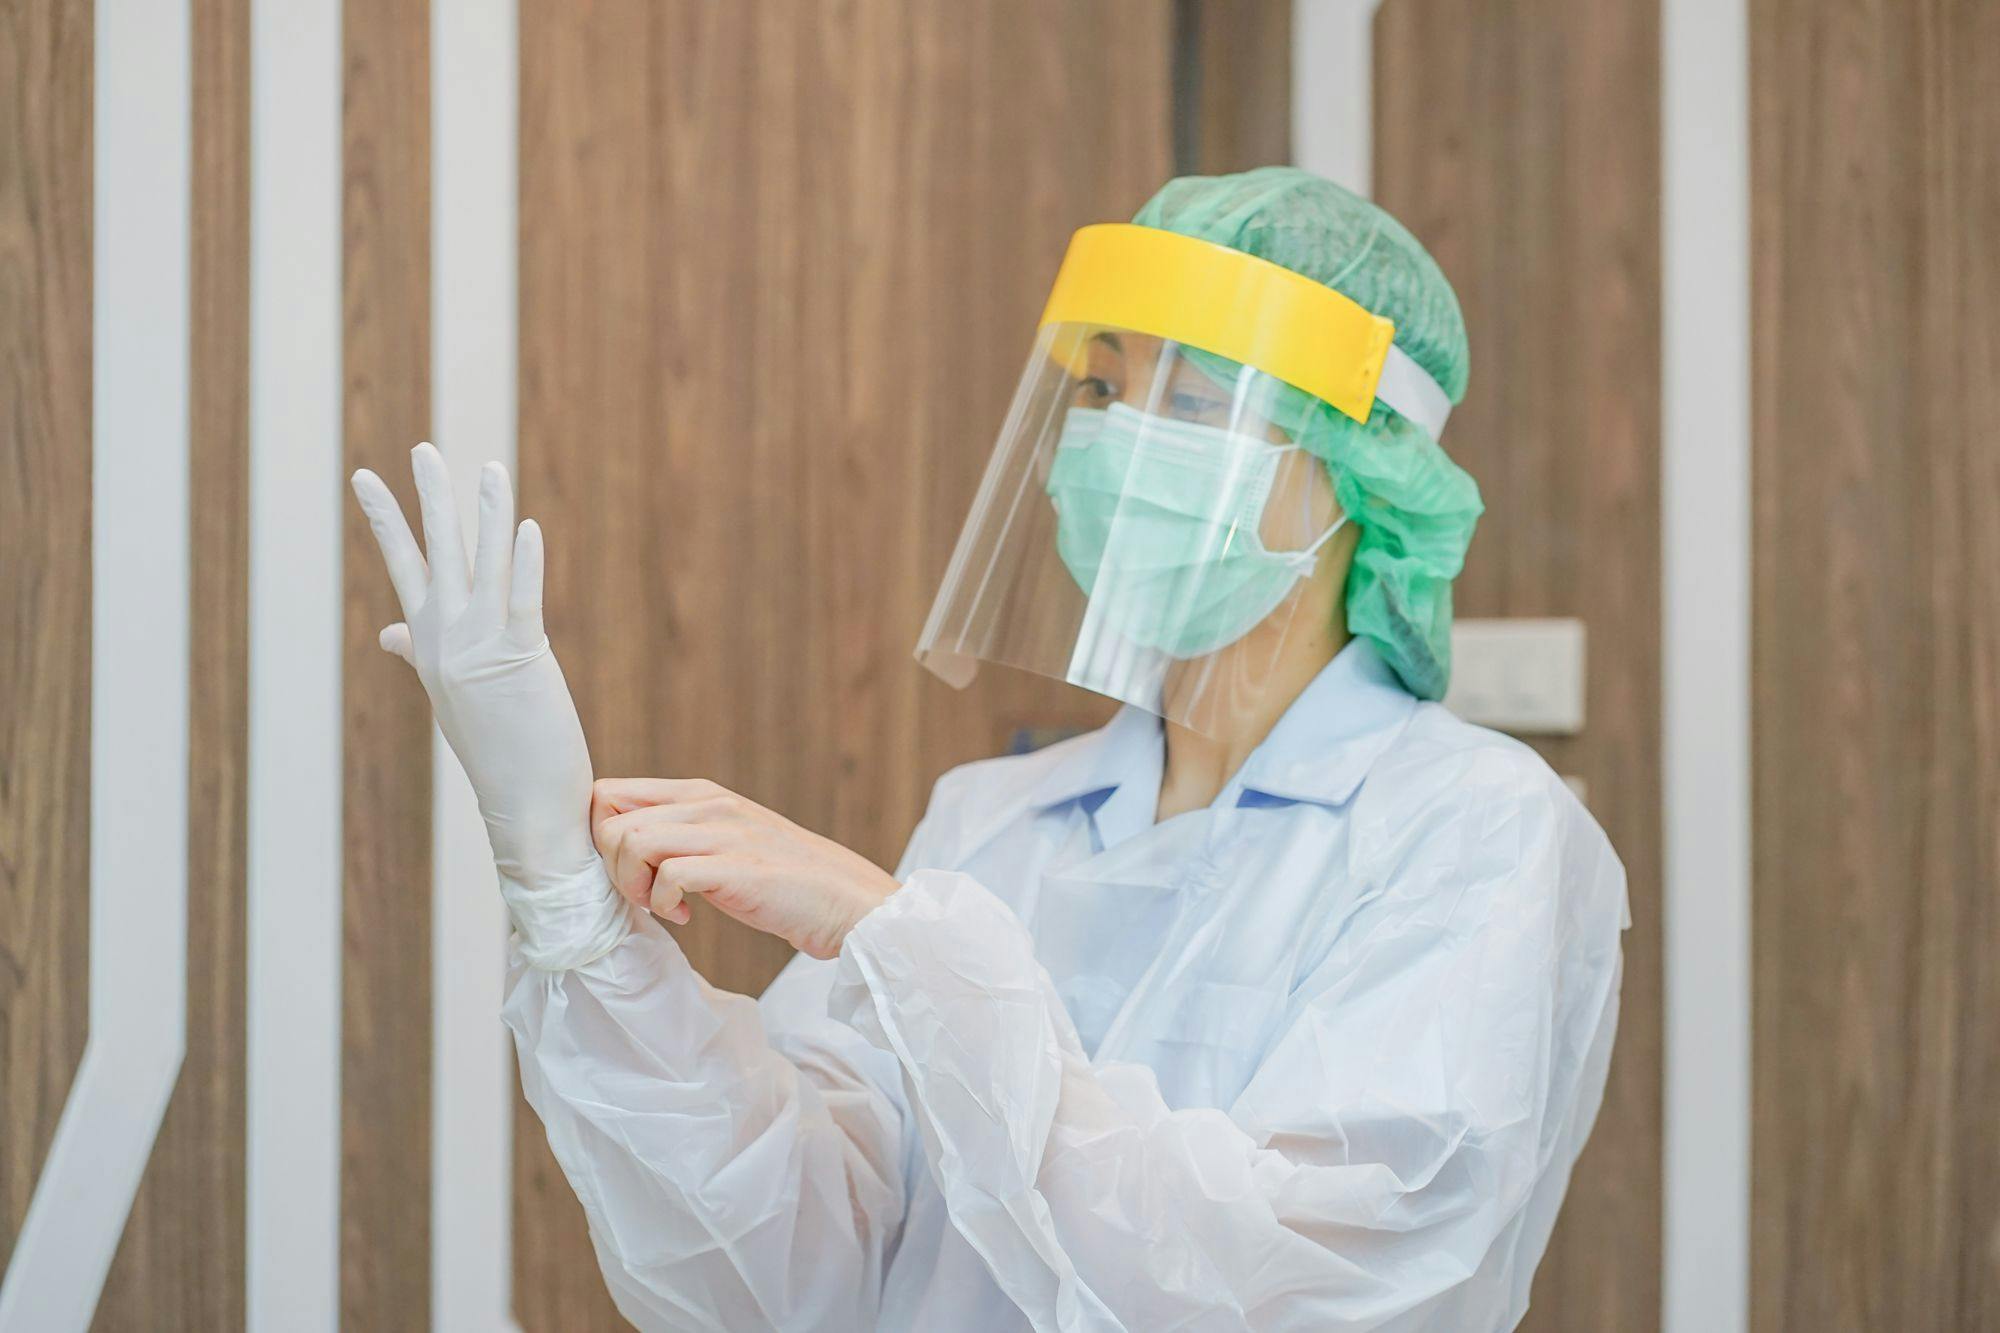 What Every Dental Professional Should Know About Personal Protective Equipment. Image courtesy of pangoasis/stock.adobe.com. 